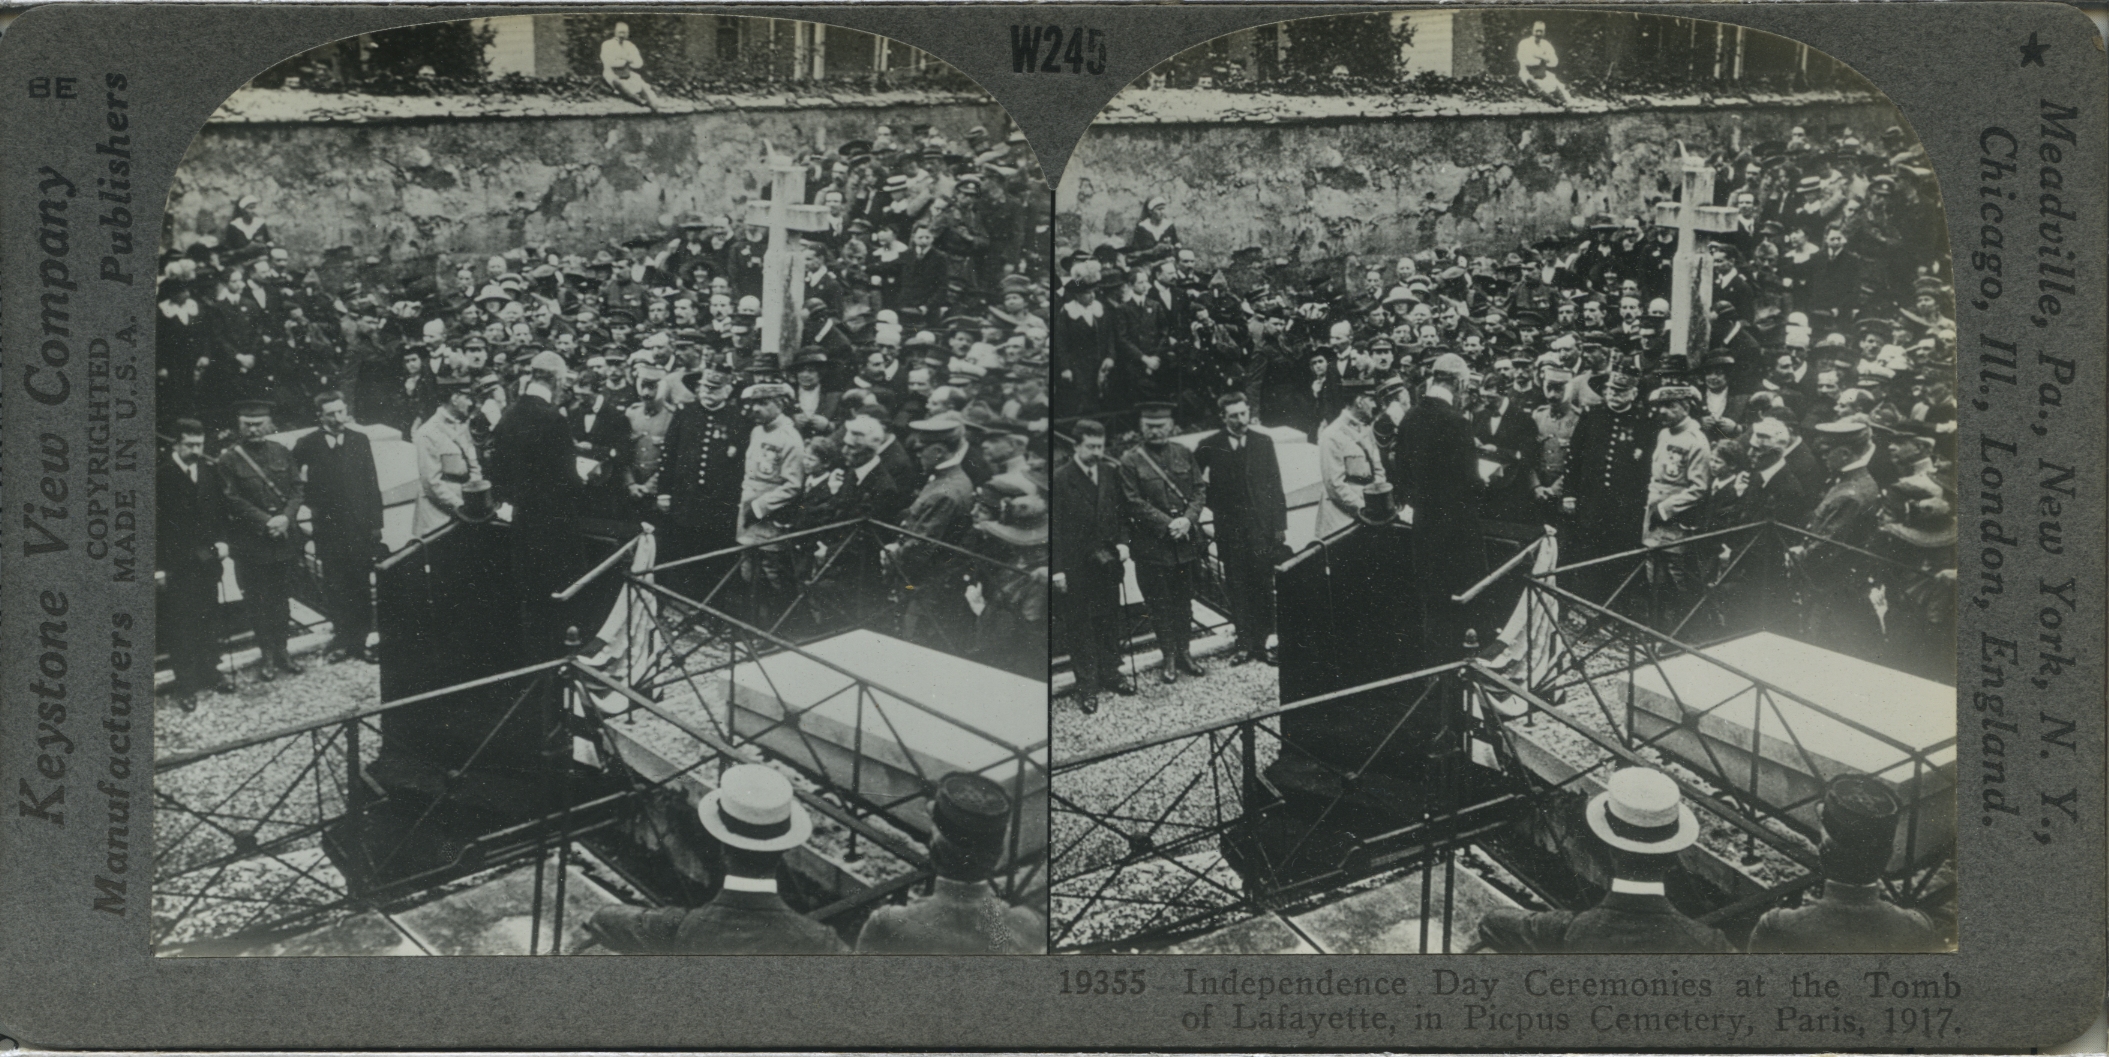 Independence Day Ceremonies at the Tomb of Lafayette, in Picpus Cemetery, Paris, 1917